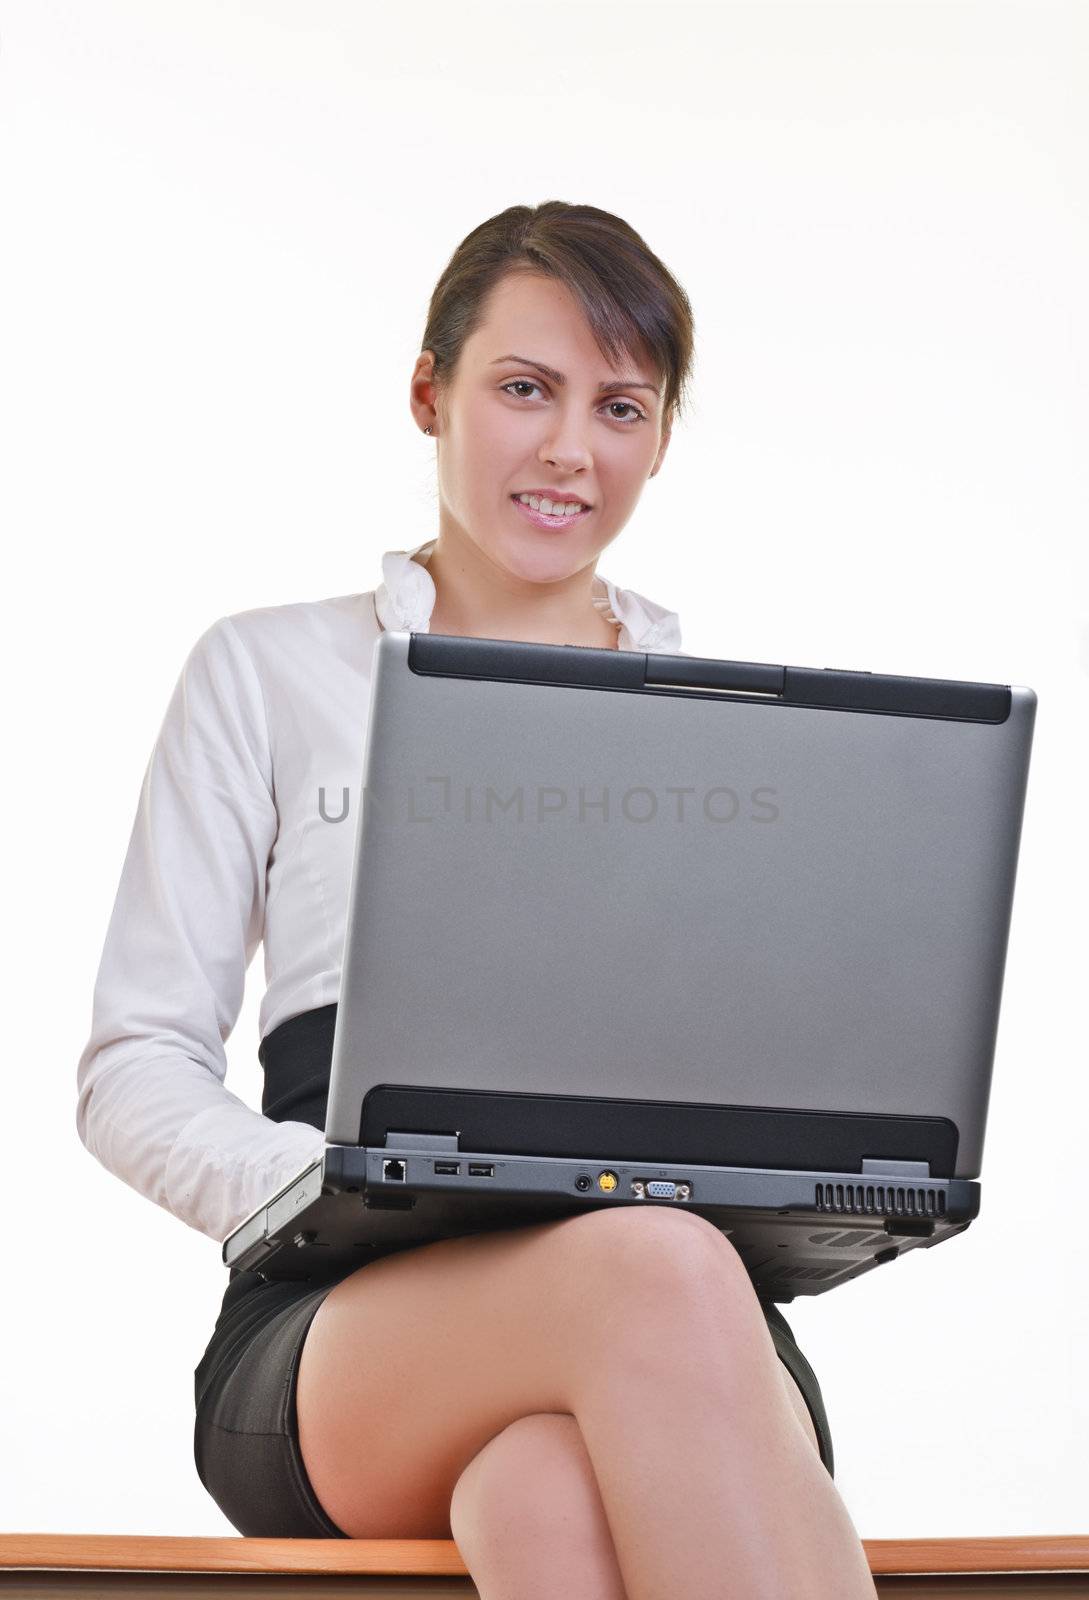 Office assistant in mini-skirt and white shirt sitting on top of office desk with laptop, eye contact